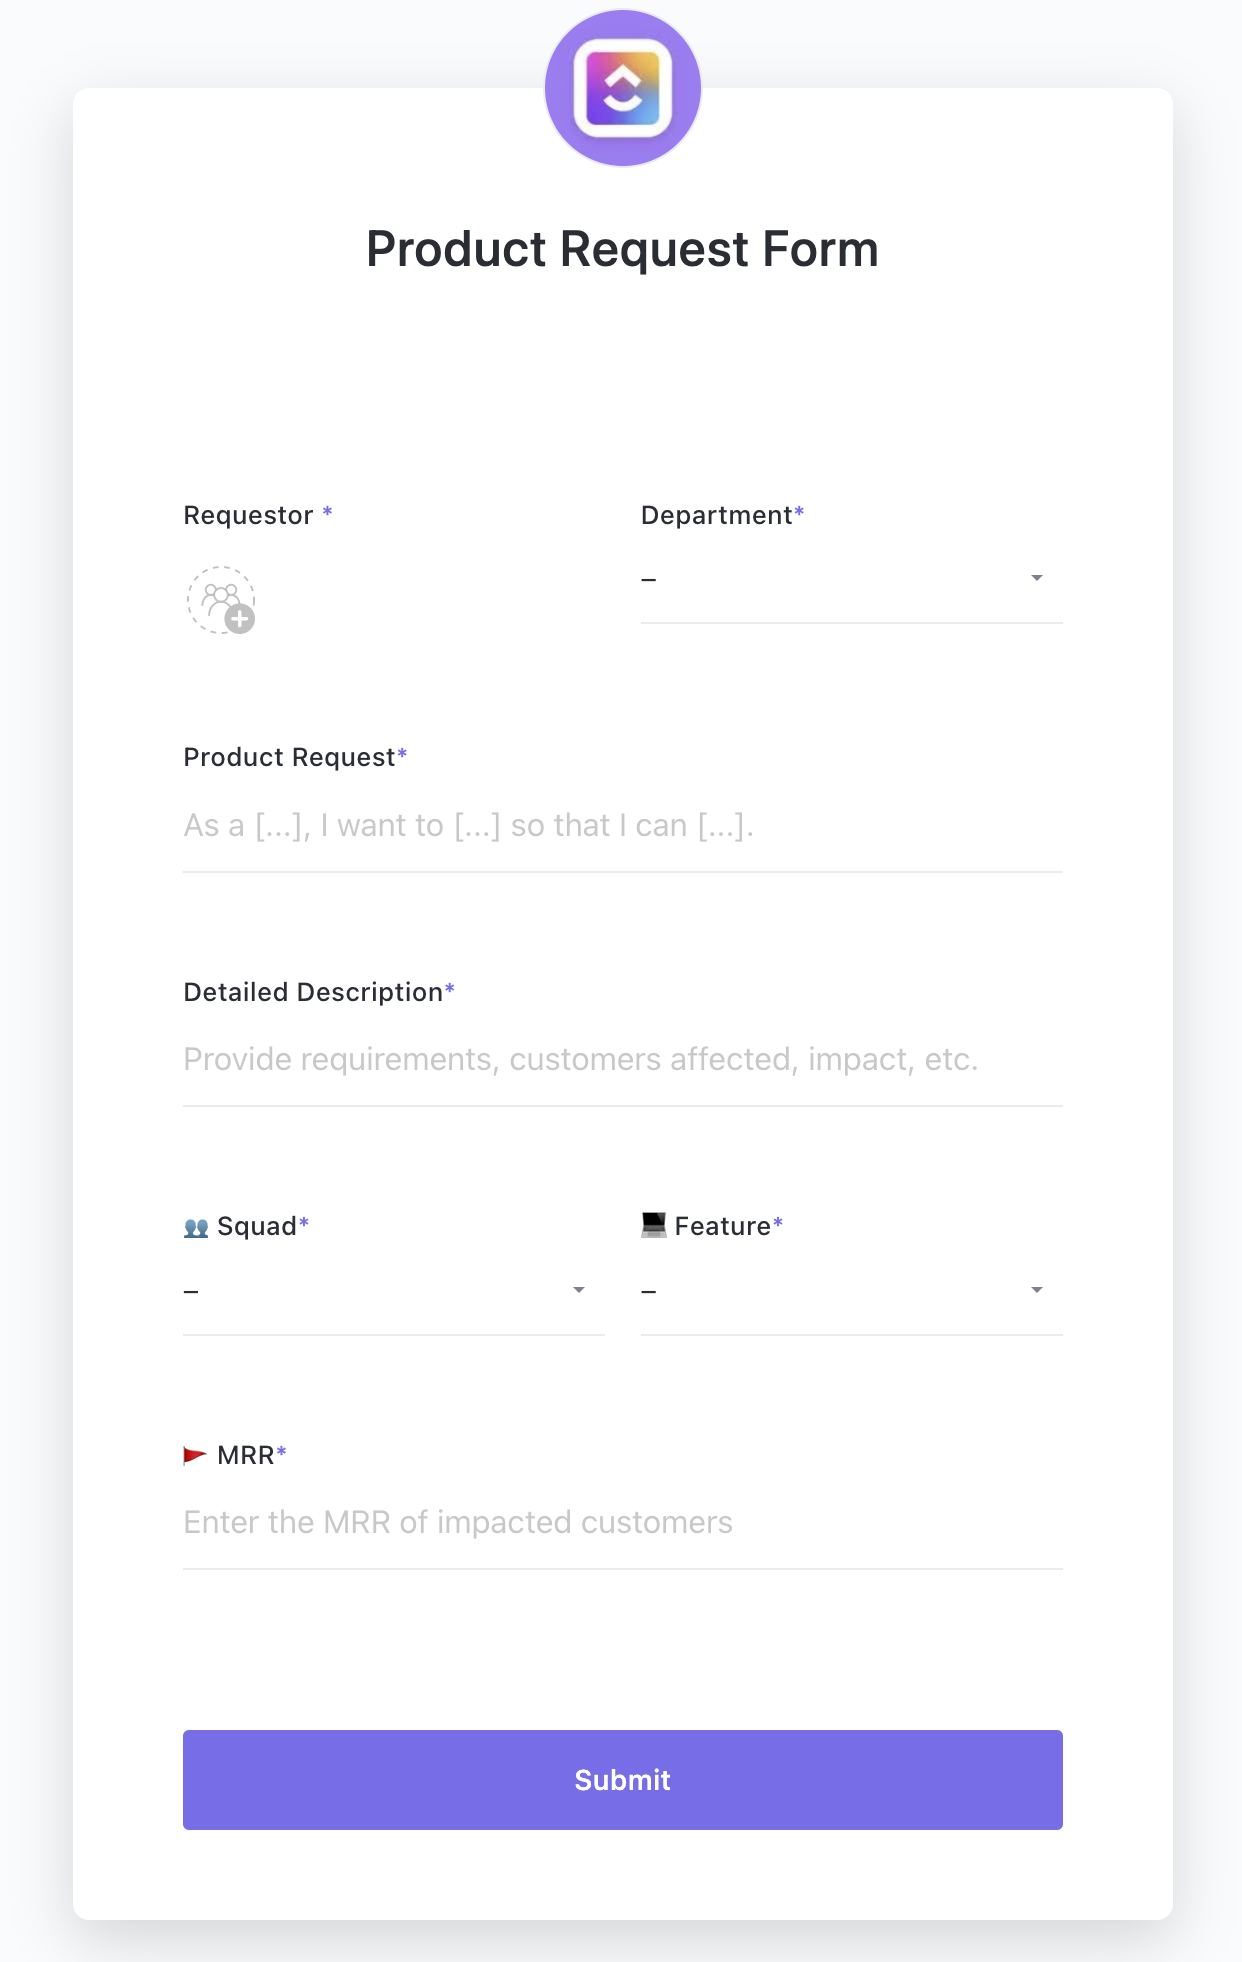 Image of the product request form